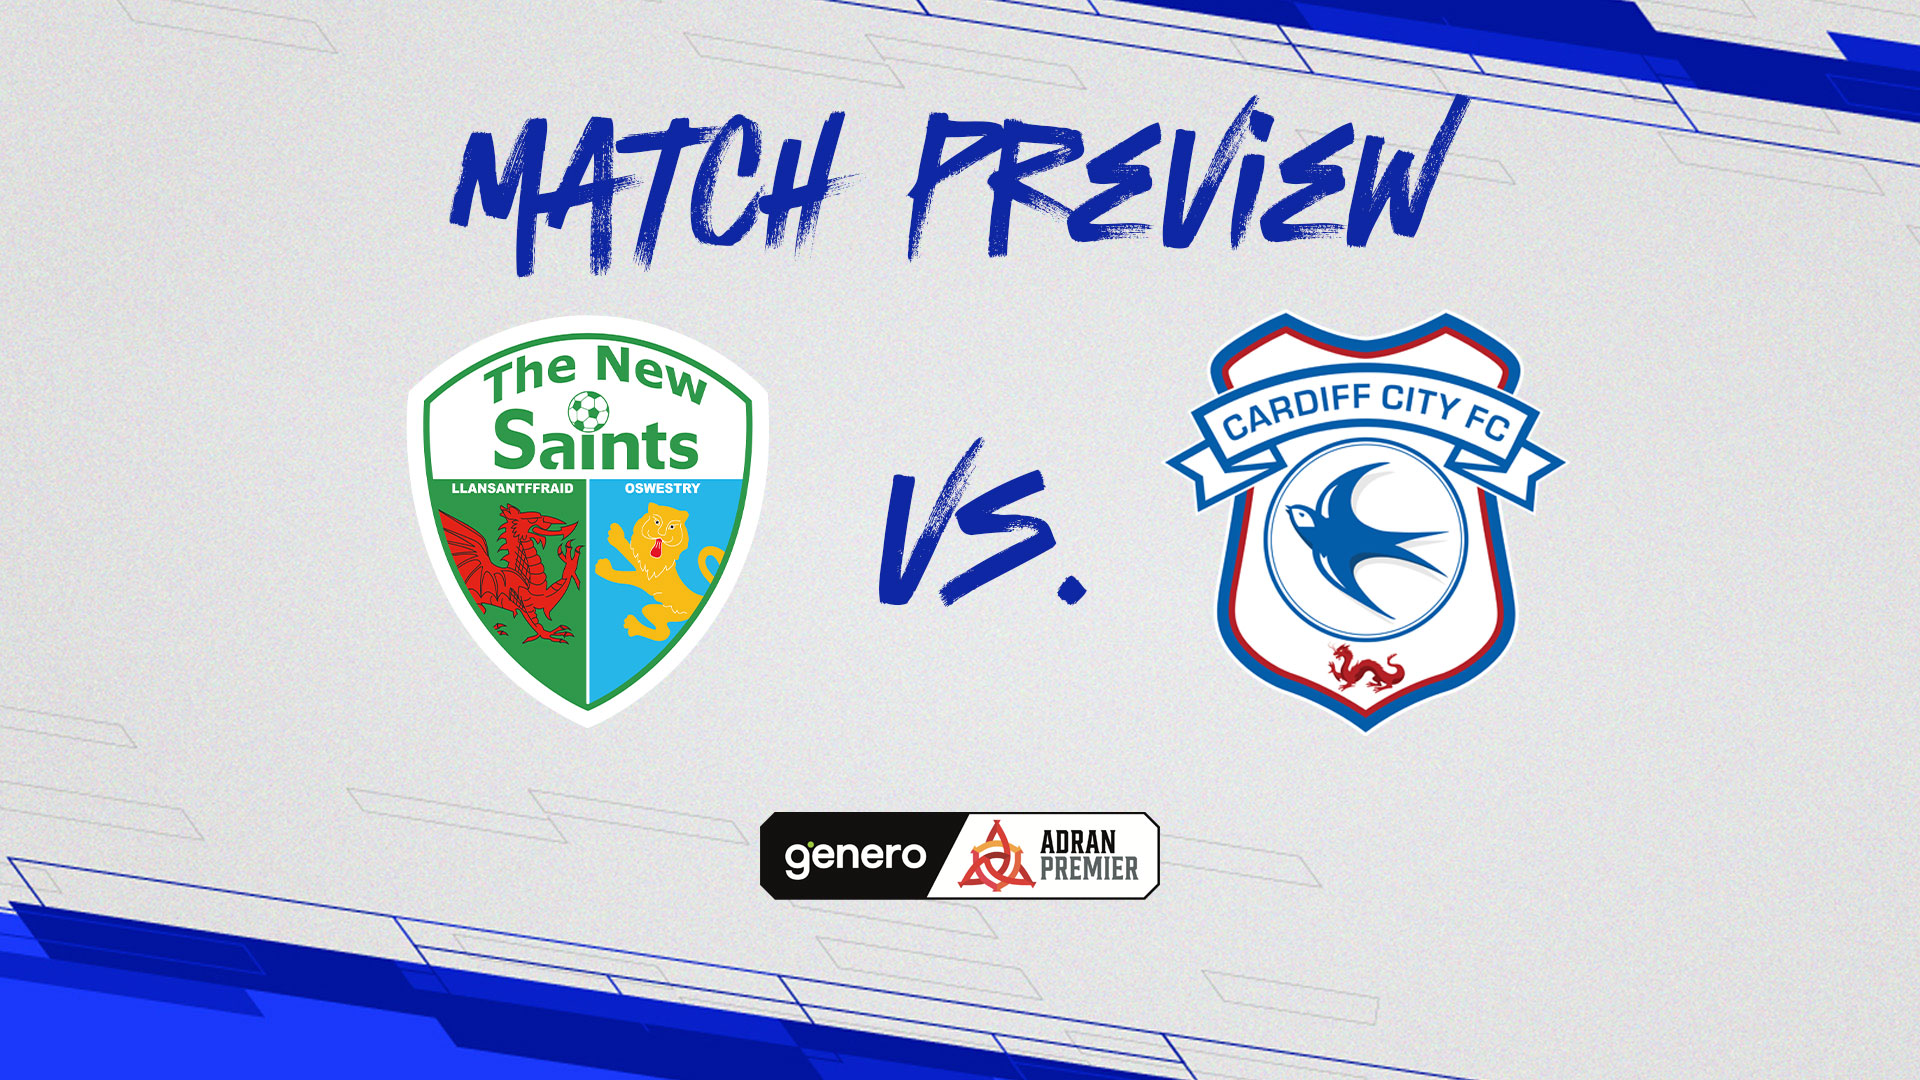 Match Preview: The New Saints vs. Cardiff City